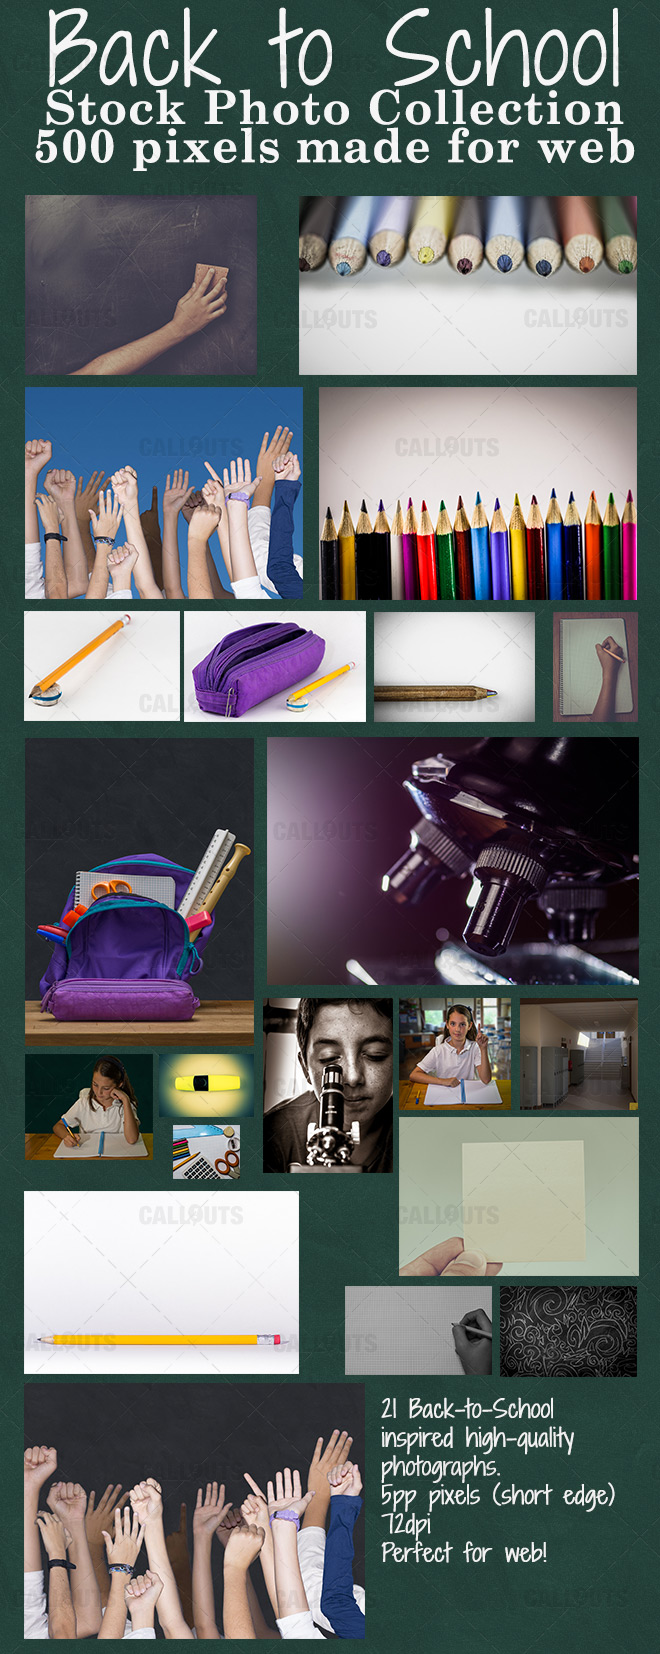 10012-Stock-Photo-Collection-Overview